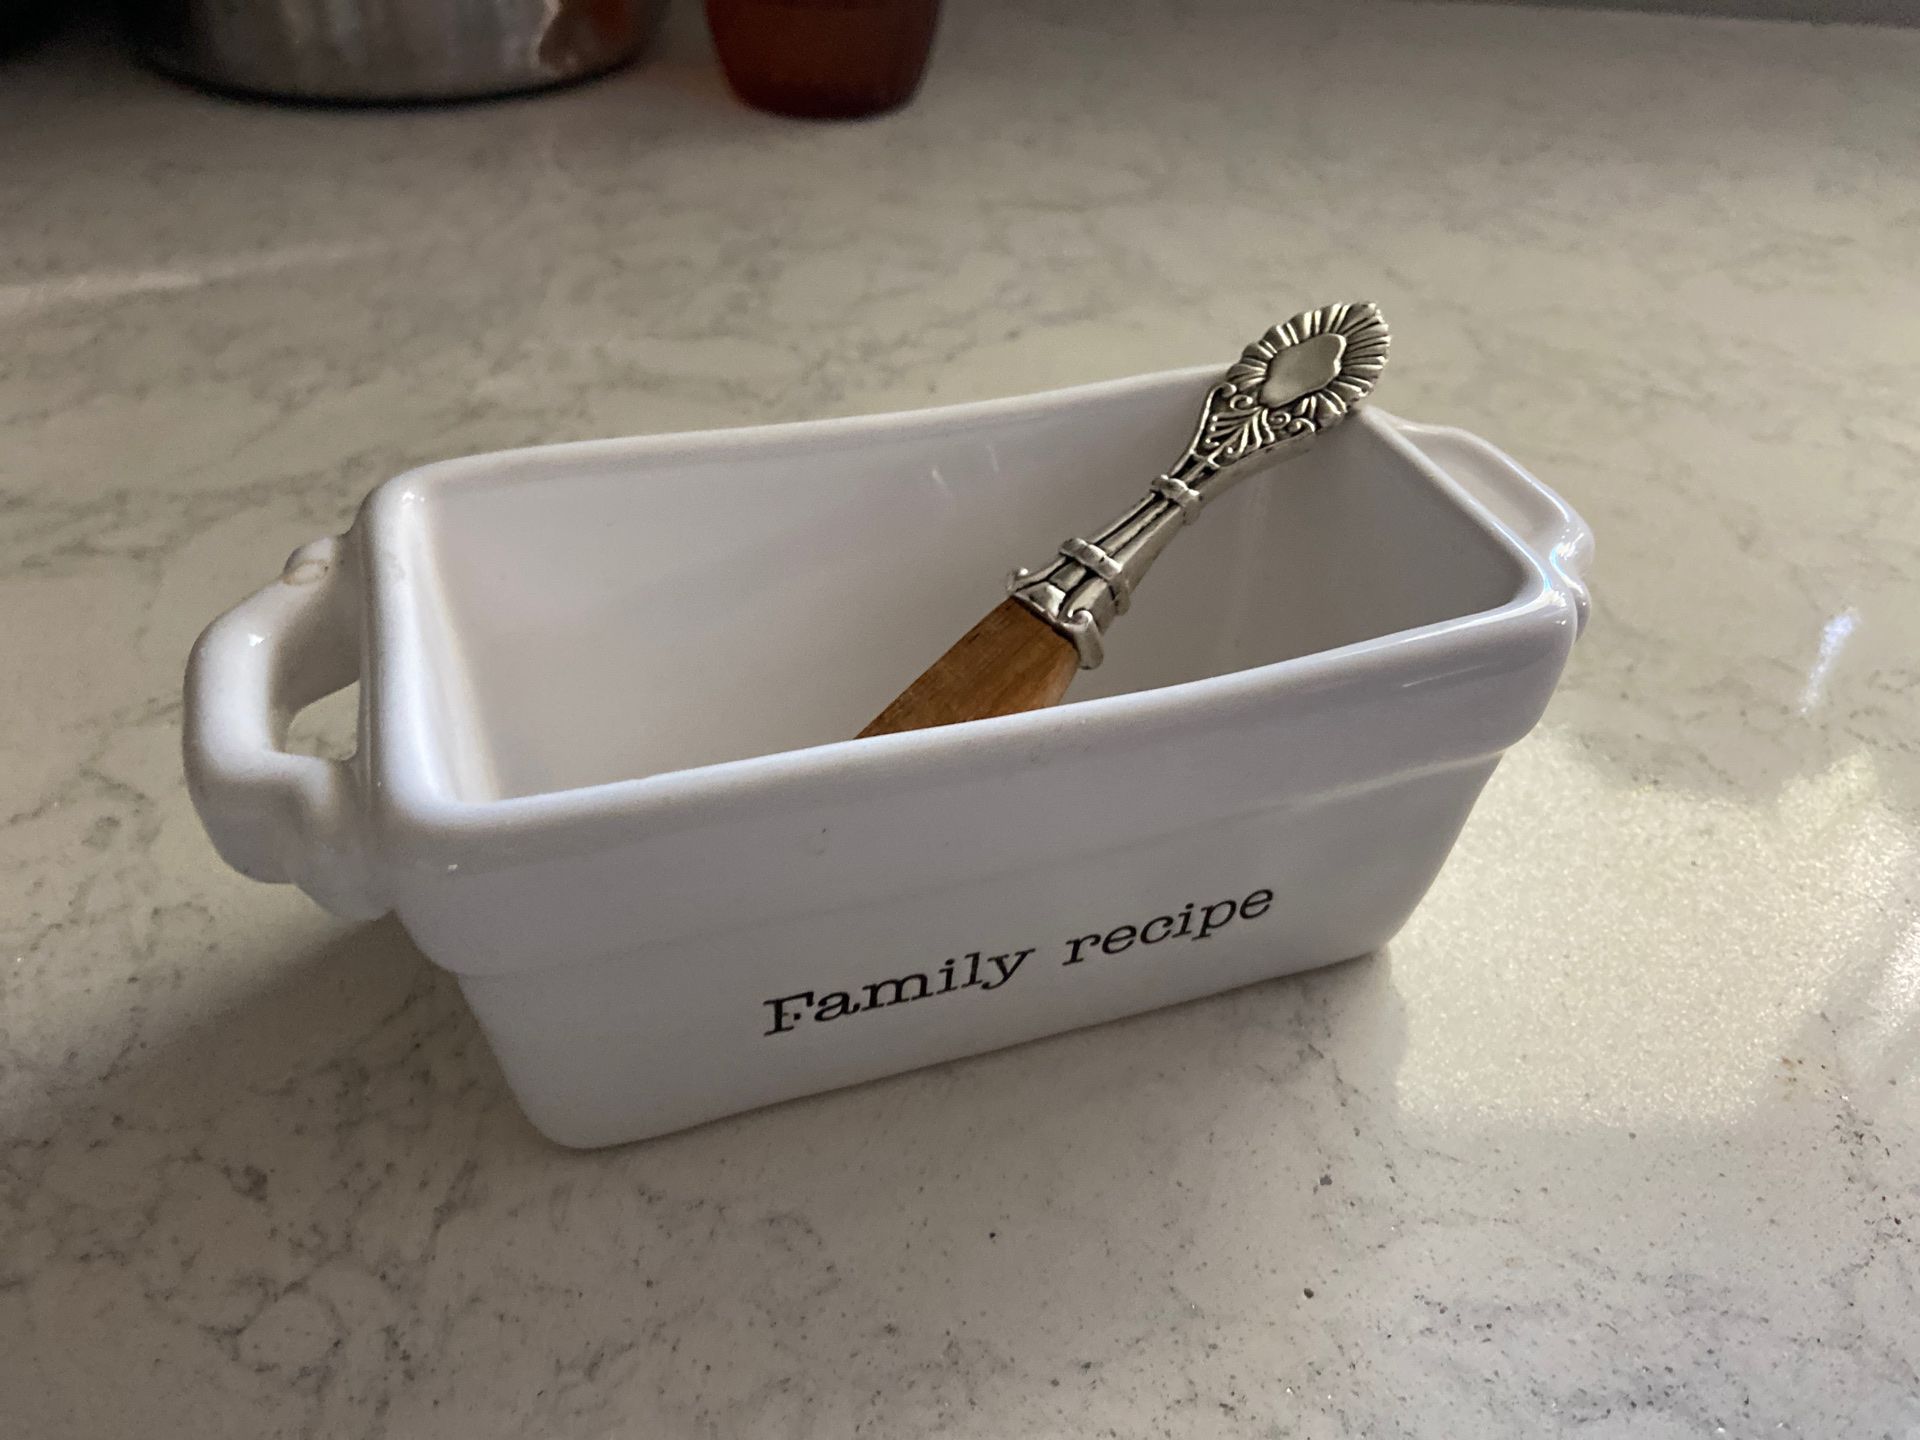 Mud Pie “Family Recipe” Butter Dish with spreading knife